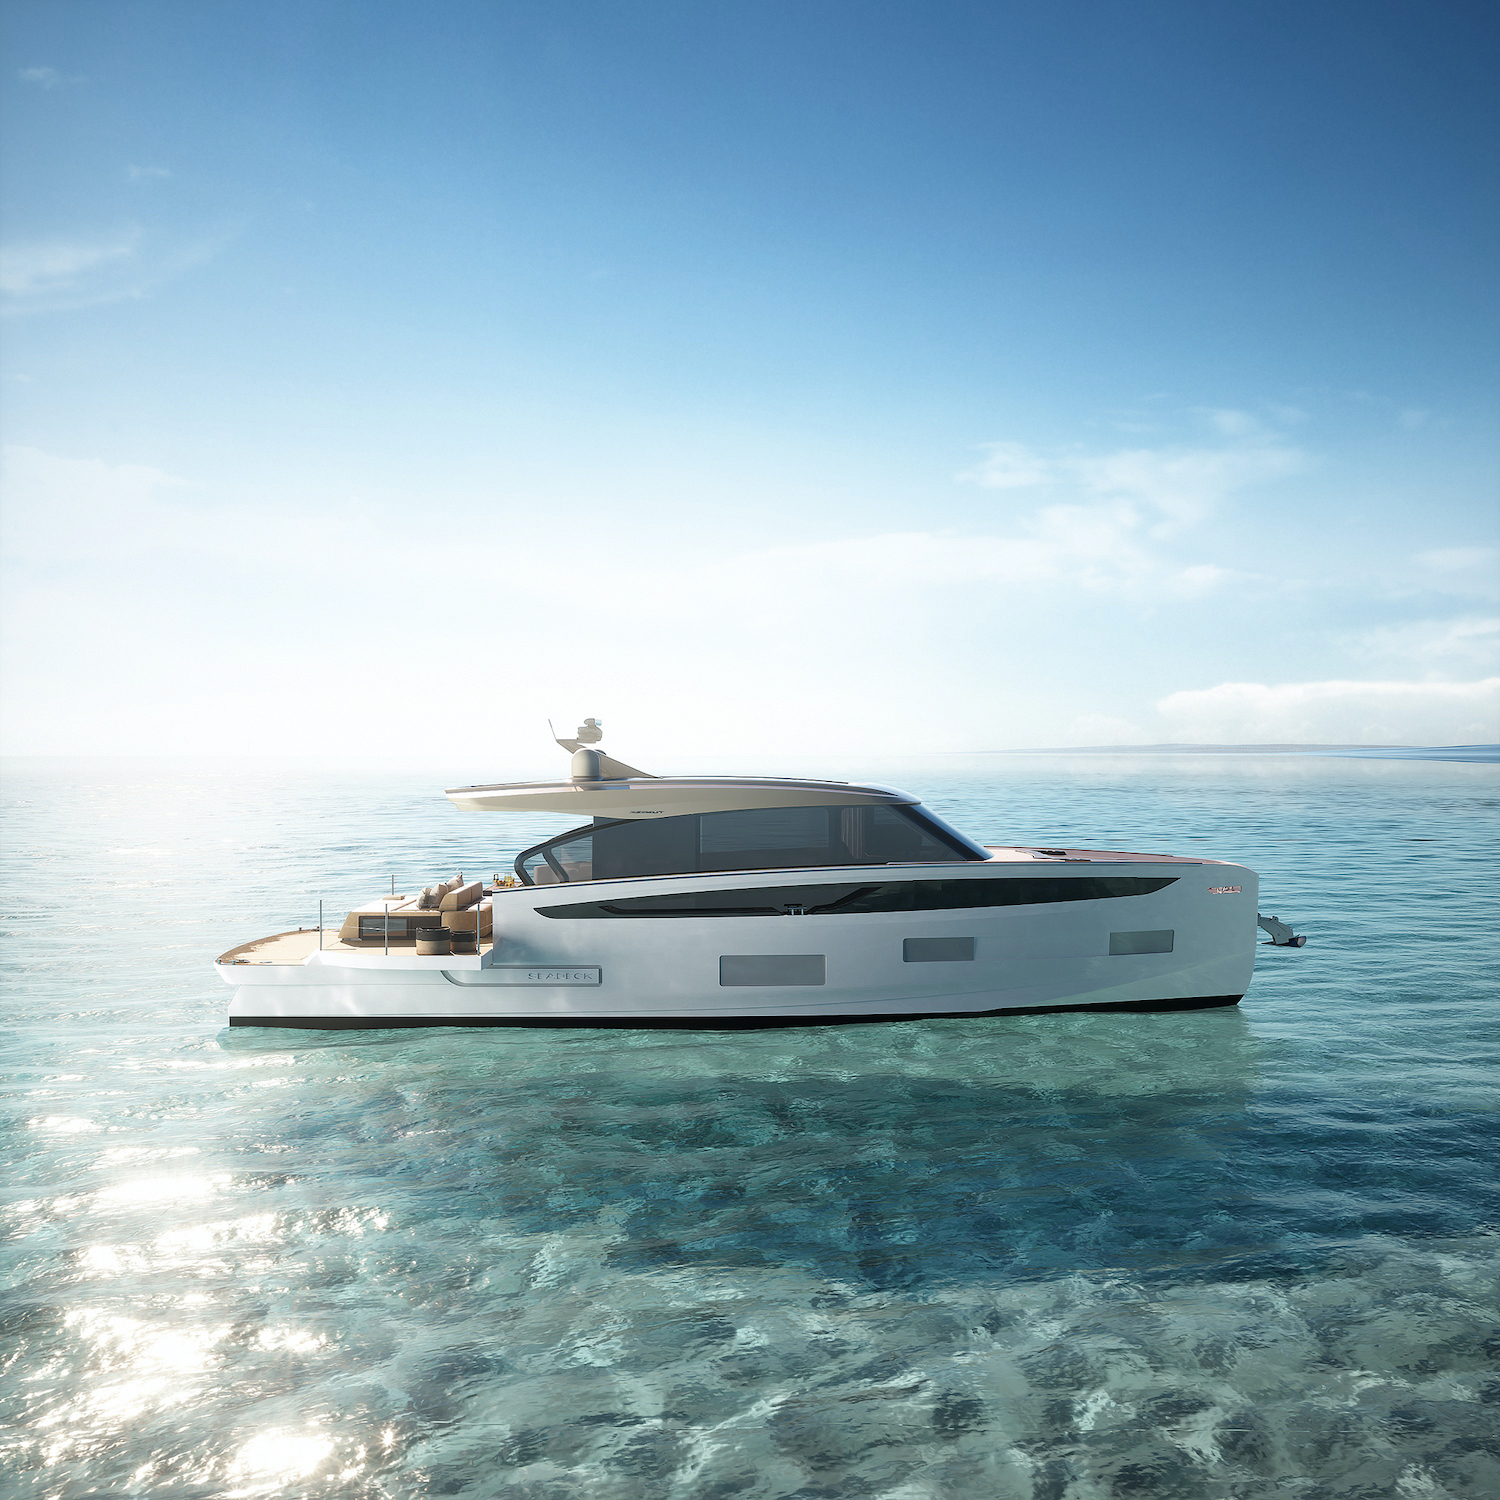 Azimut’s New Seadeck Series Delivers Hybrid and New Technolgies